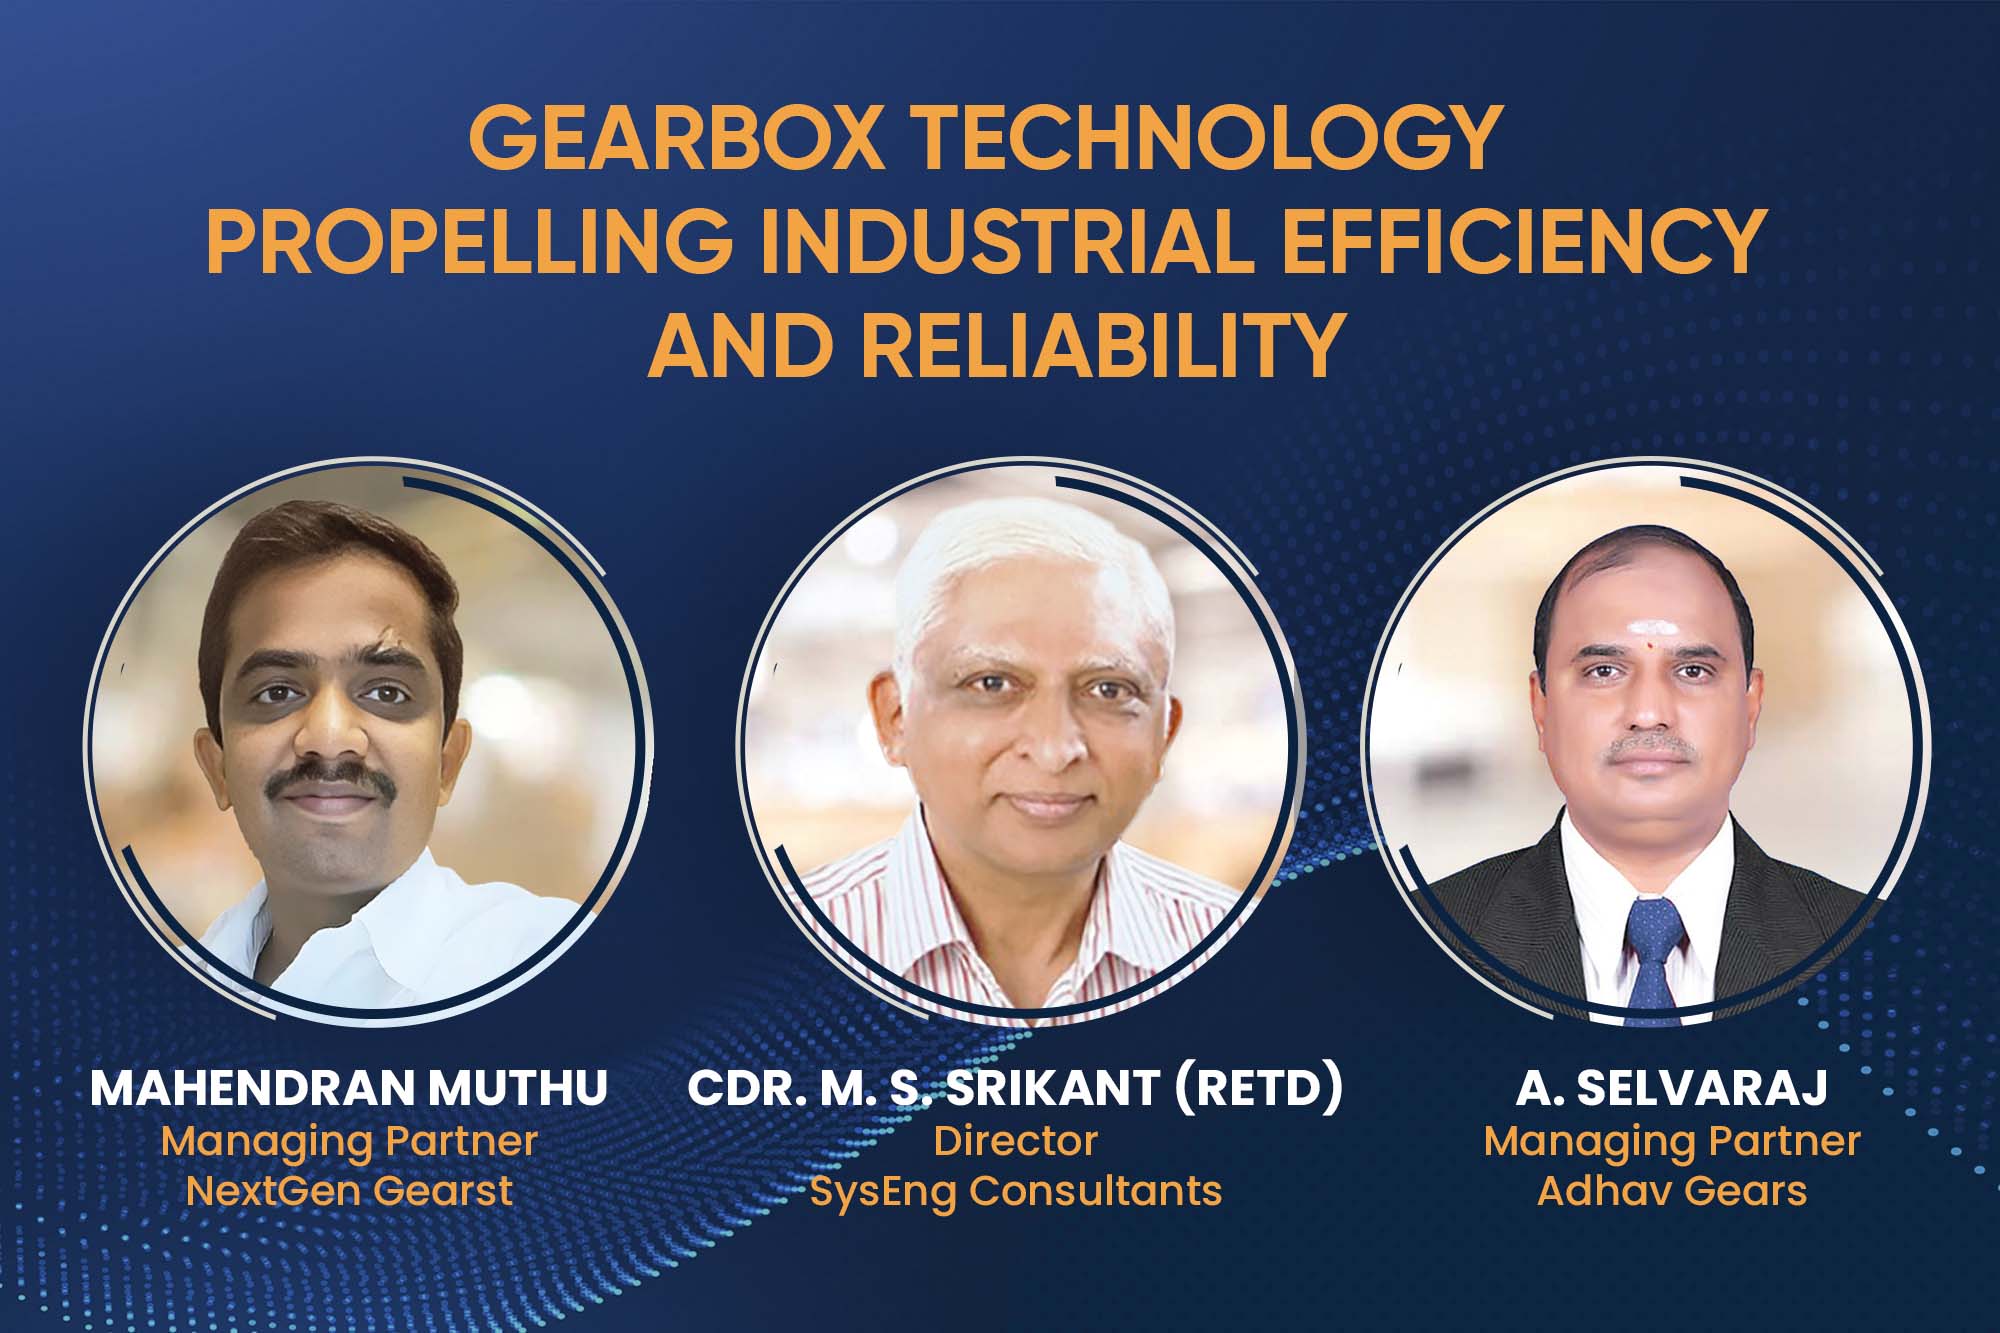 Gearbox technology propelling industrial efficiency and reliability